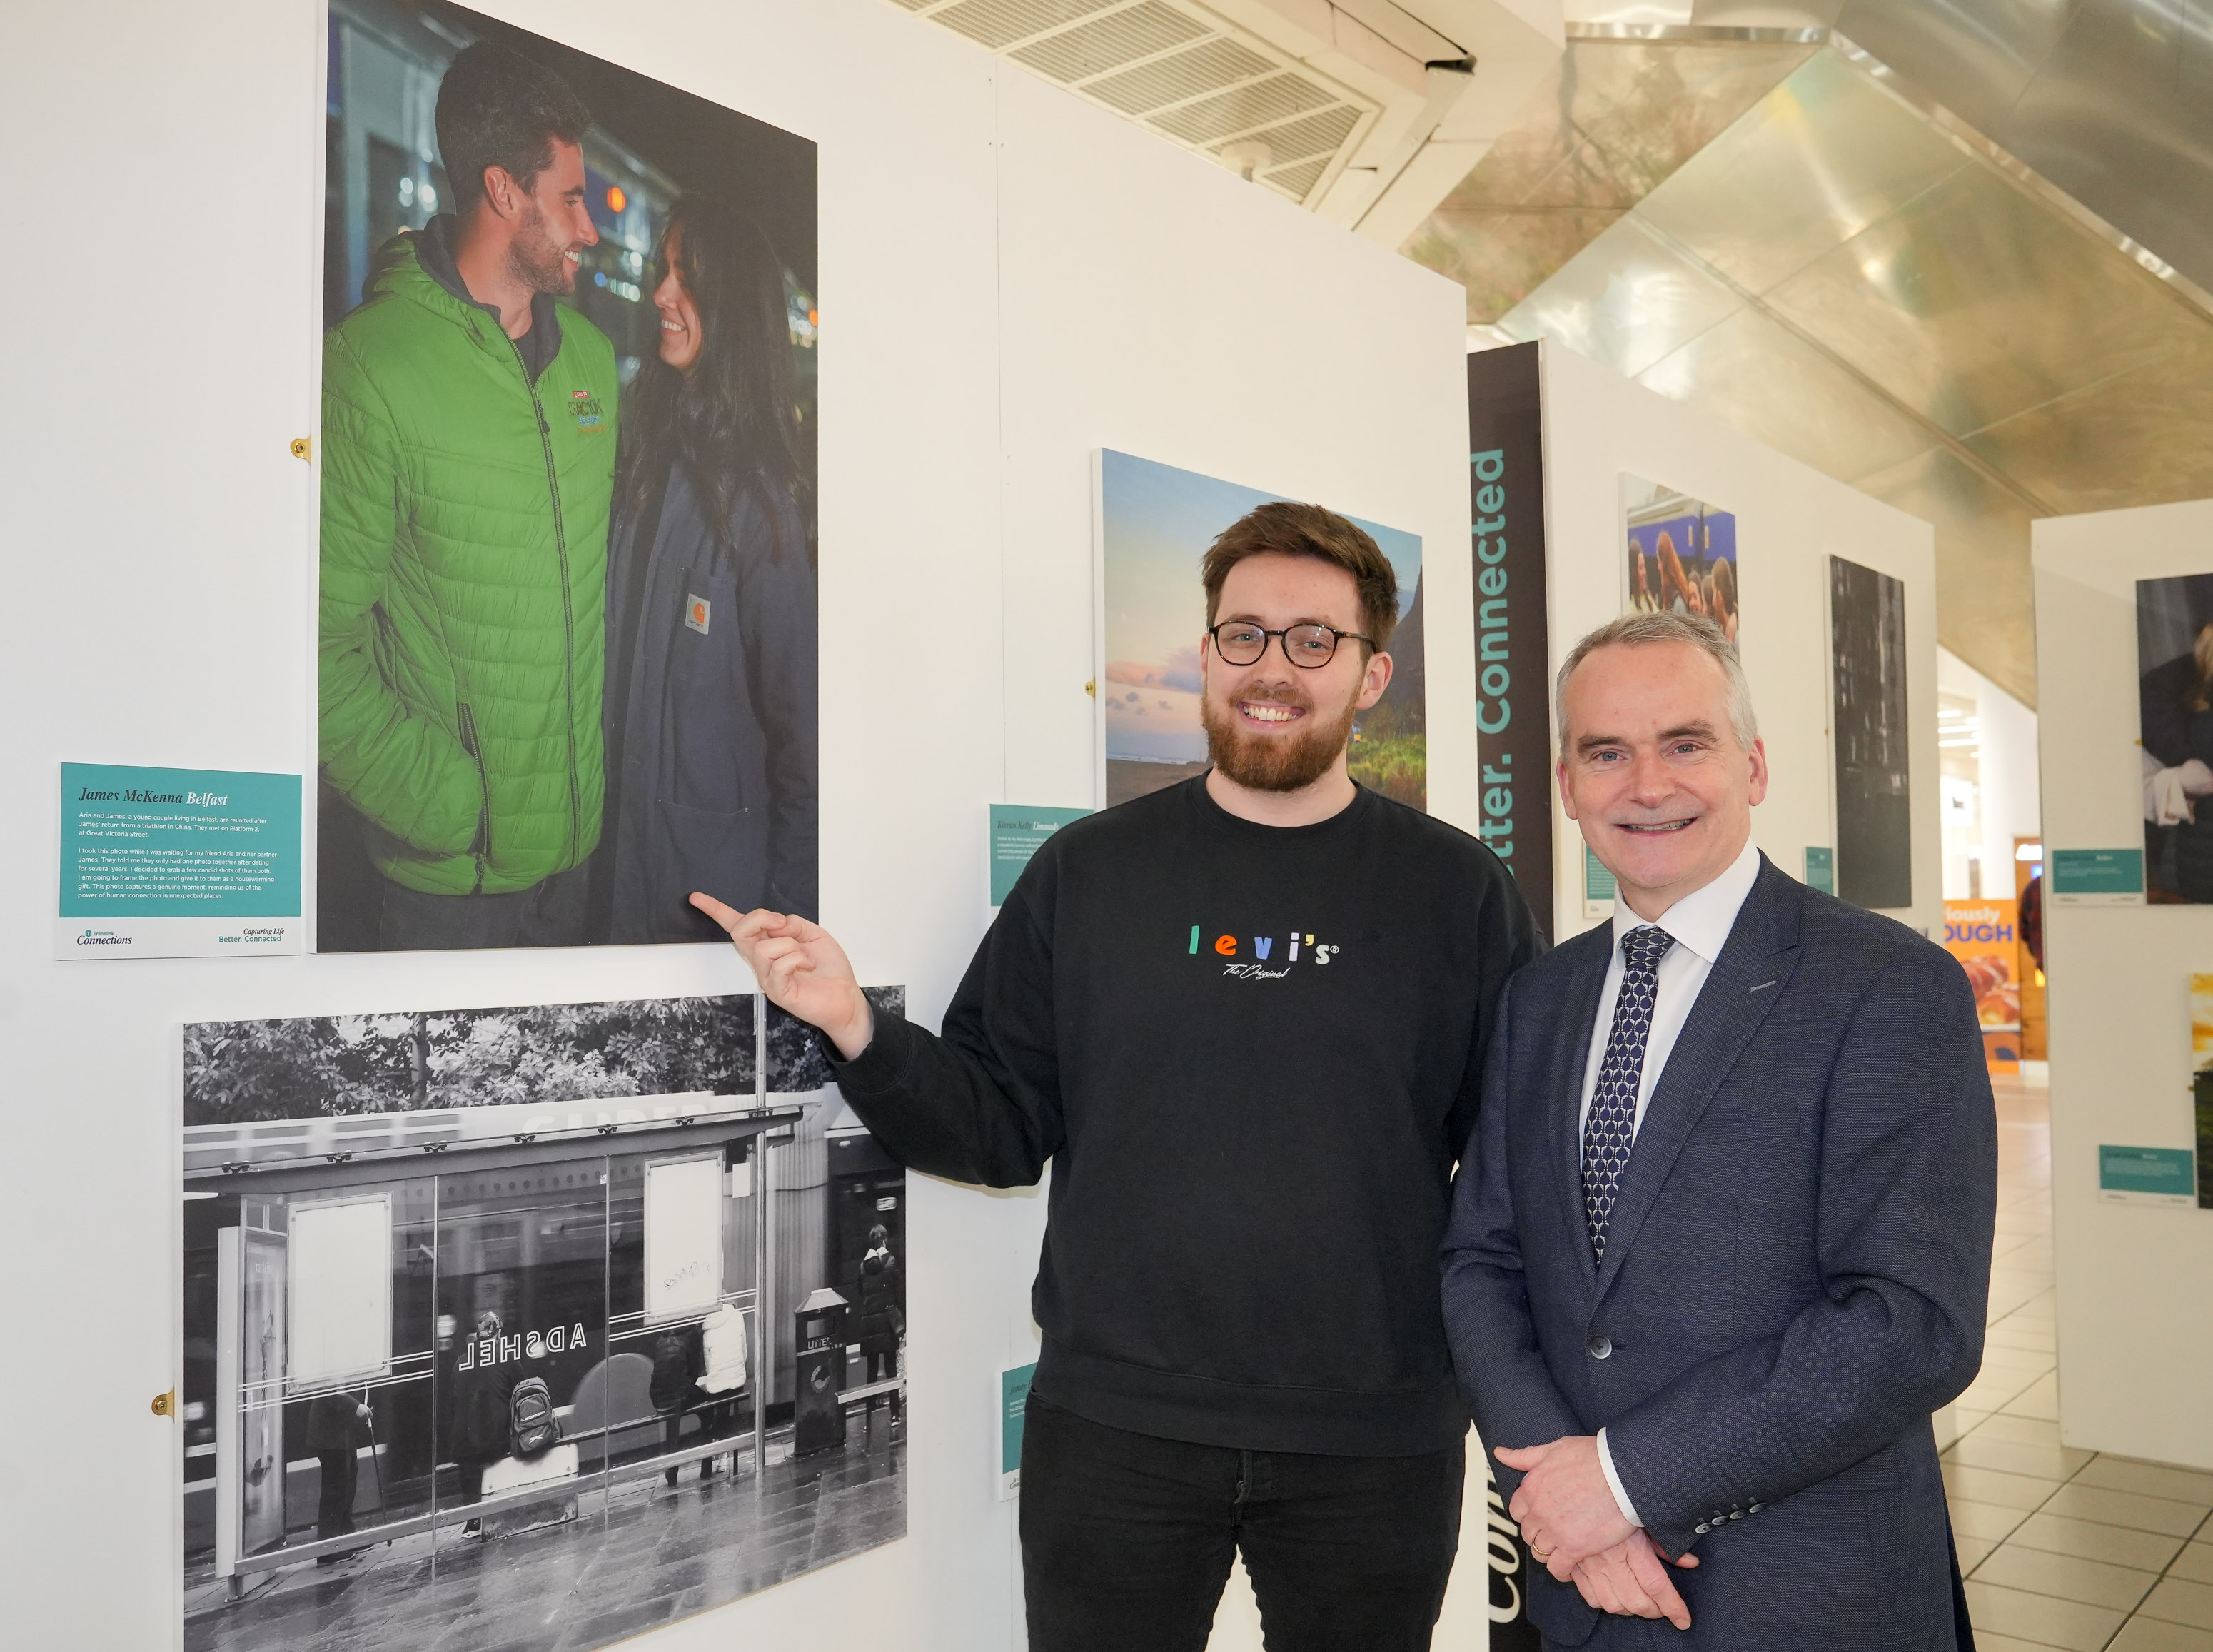 Translink CEO Chris Conway with the winner of the Connections photo exhibition